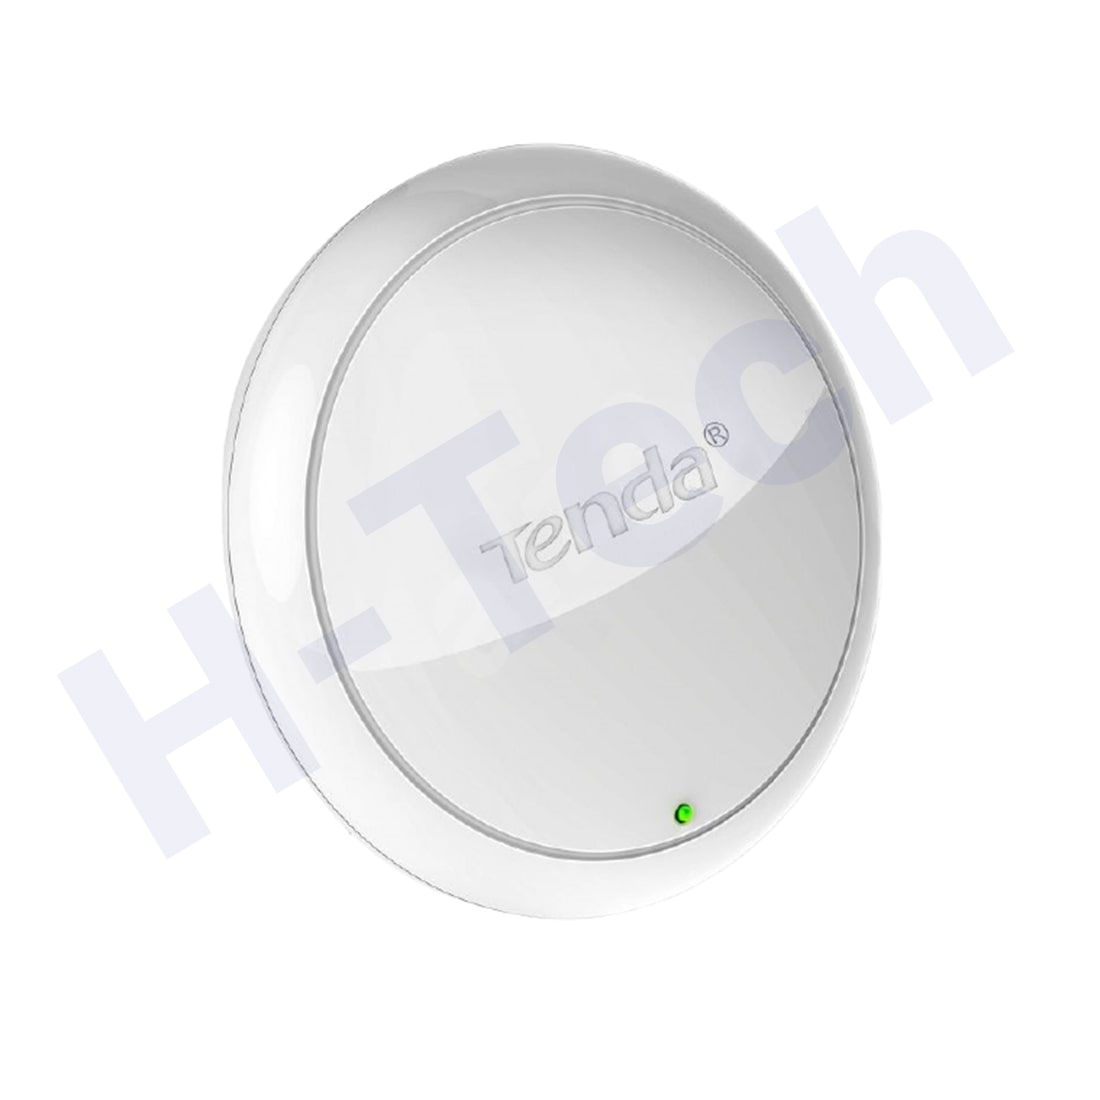 I6/INDOOR CEILLING ACCESS POINT